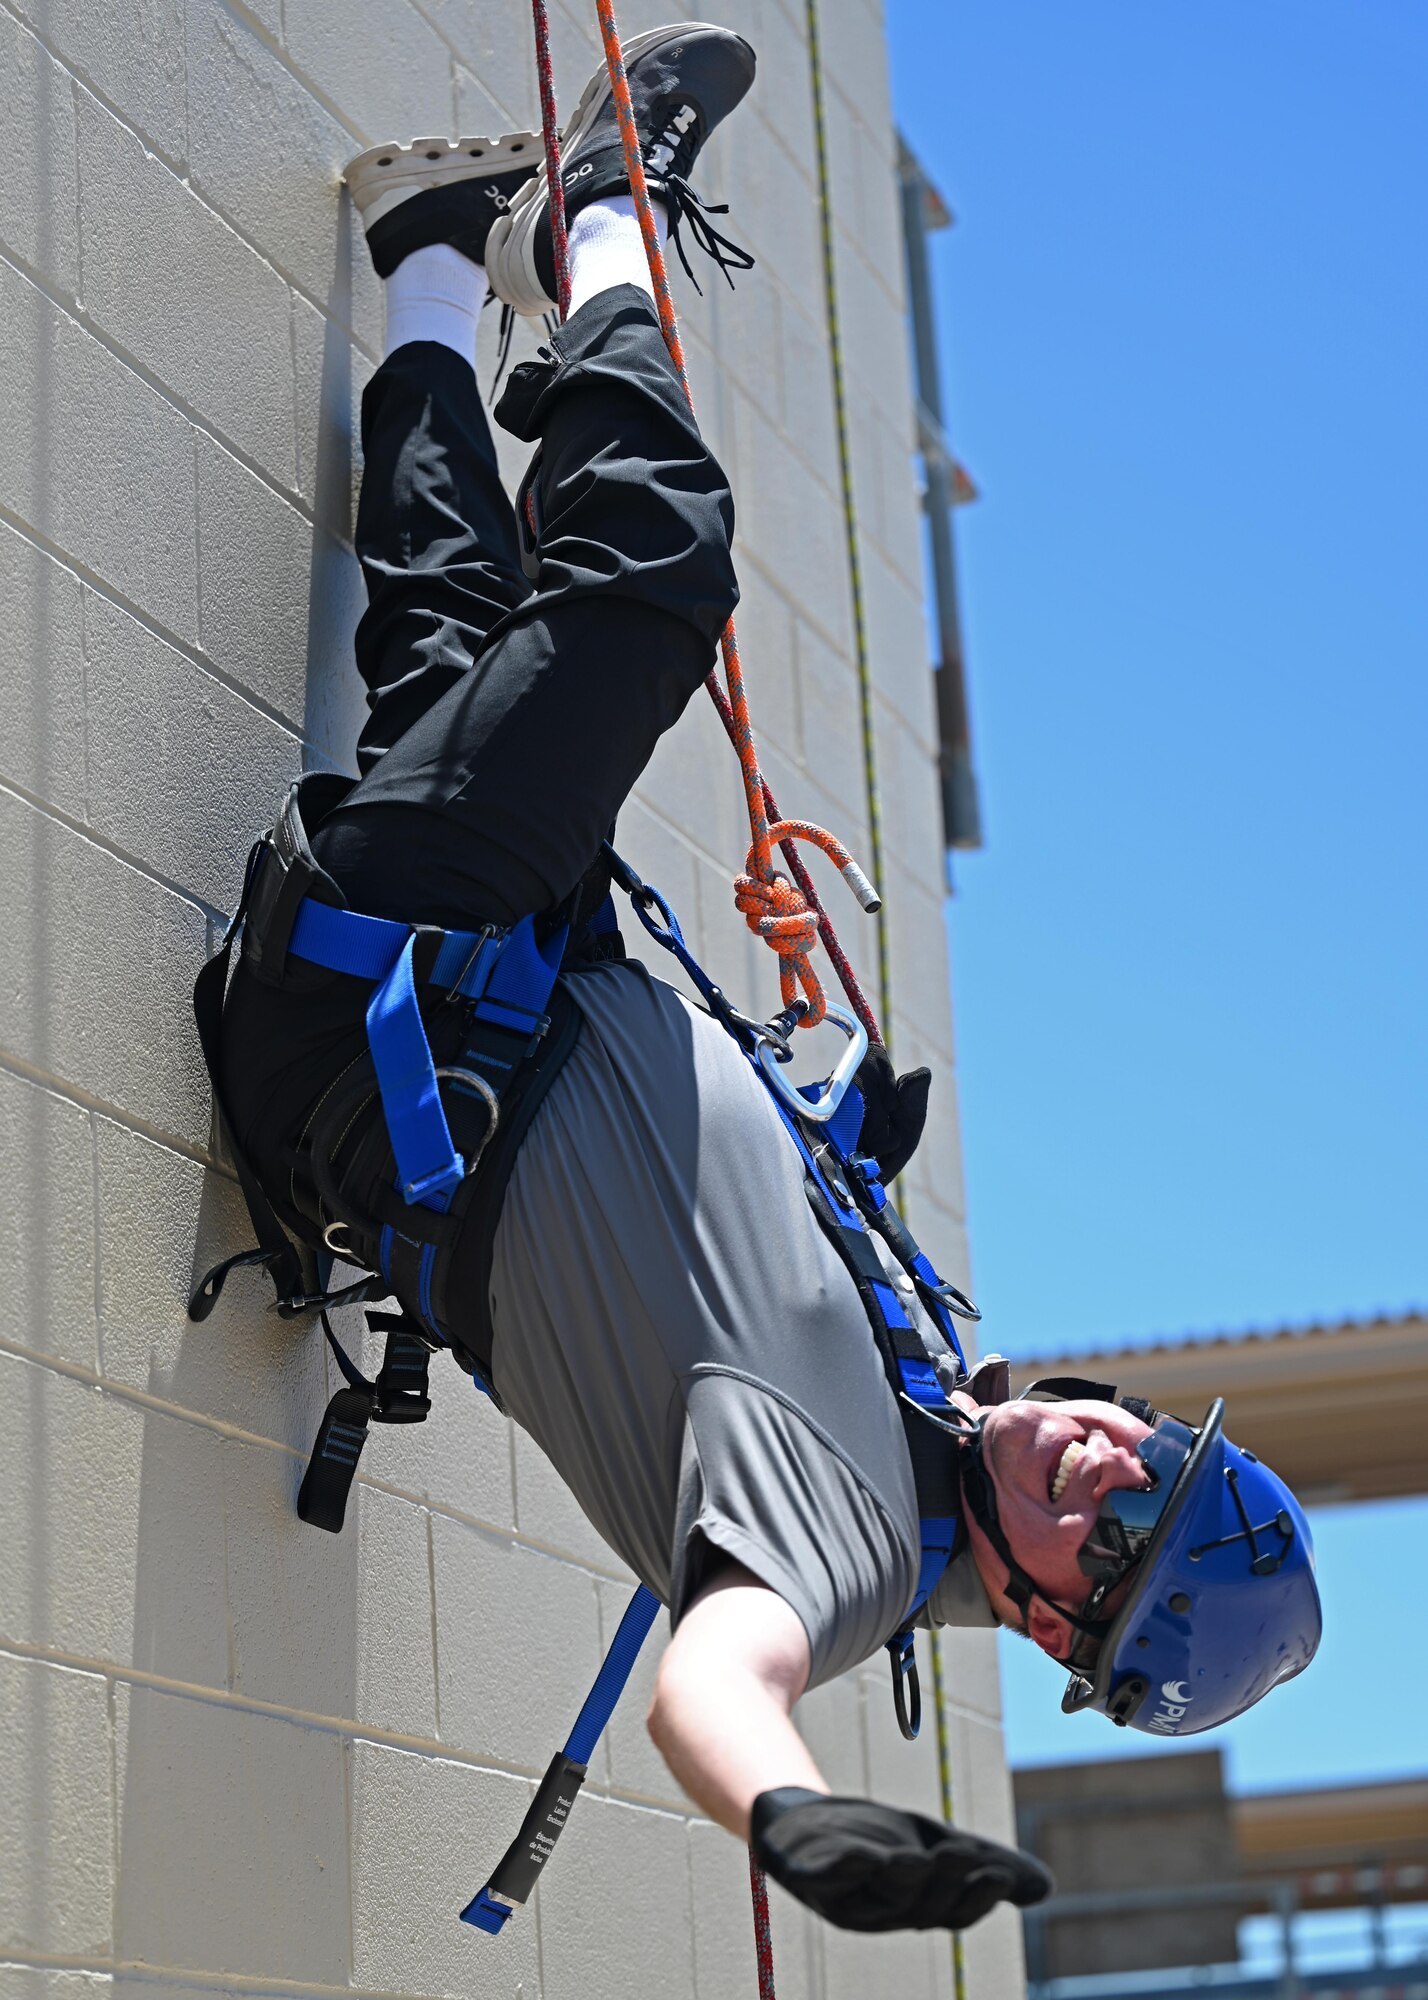 A 17th Training Wing honorary commander, Scott Creesy, inverts at the Louis F. Garland Department of Defense Fire Academy on Goodfellow Air Force Base, Texas, June 8, 2023. Repelling is a follow-on course that teaches students how to save people from steep cliffs, tall buildings, and waterways. (U.S. Air Force photo by Senior Airman Sarah Williams)